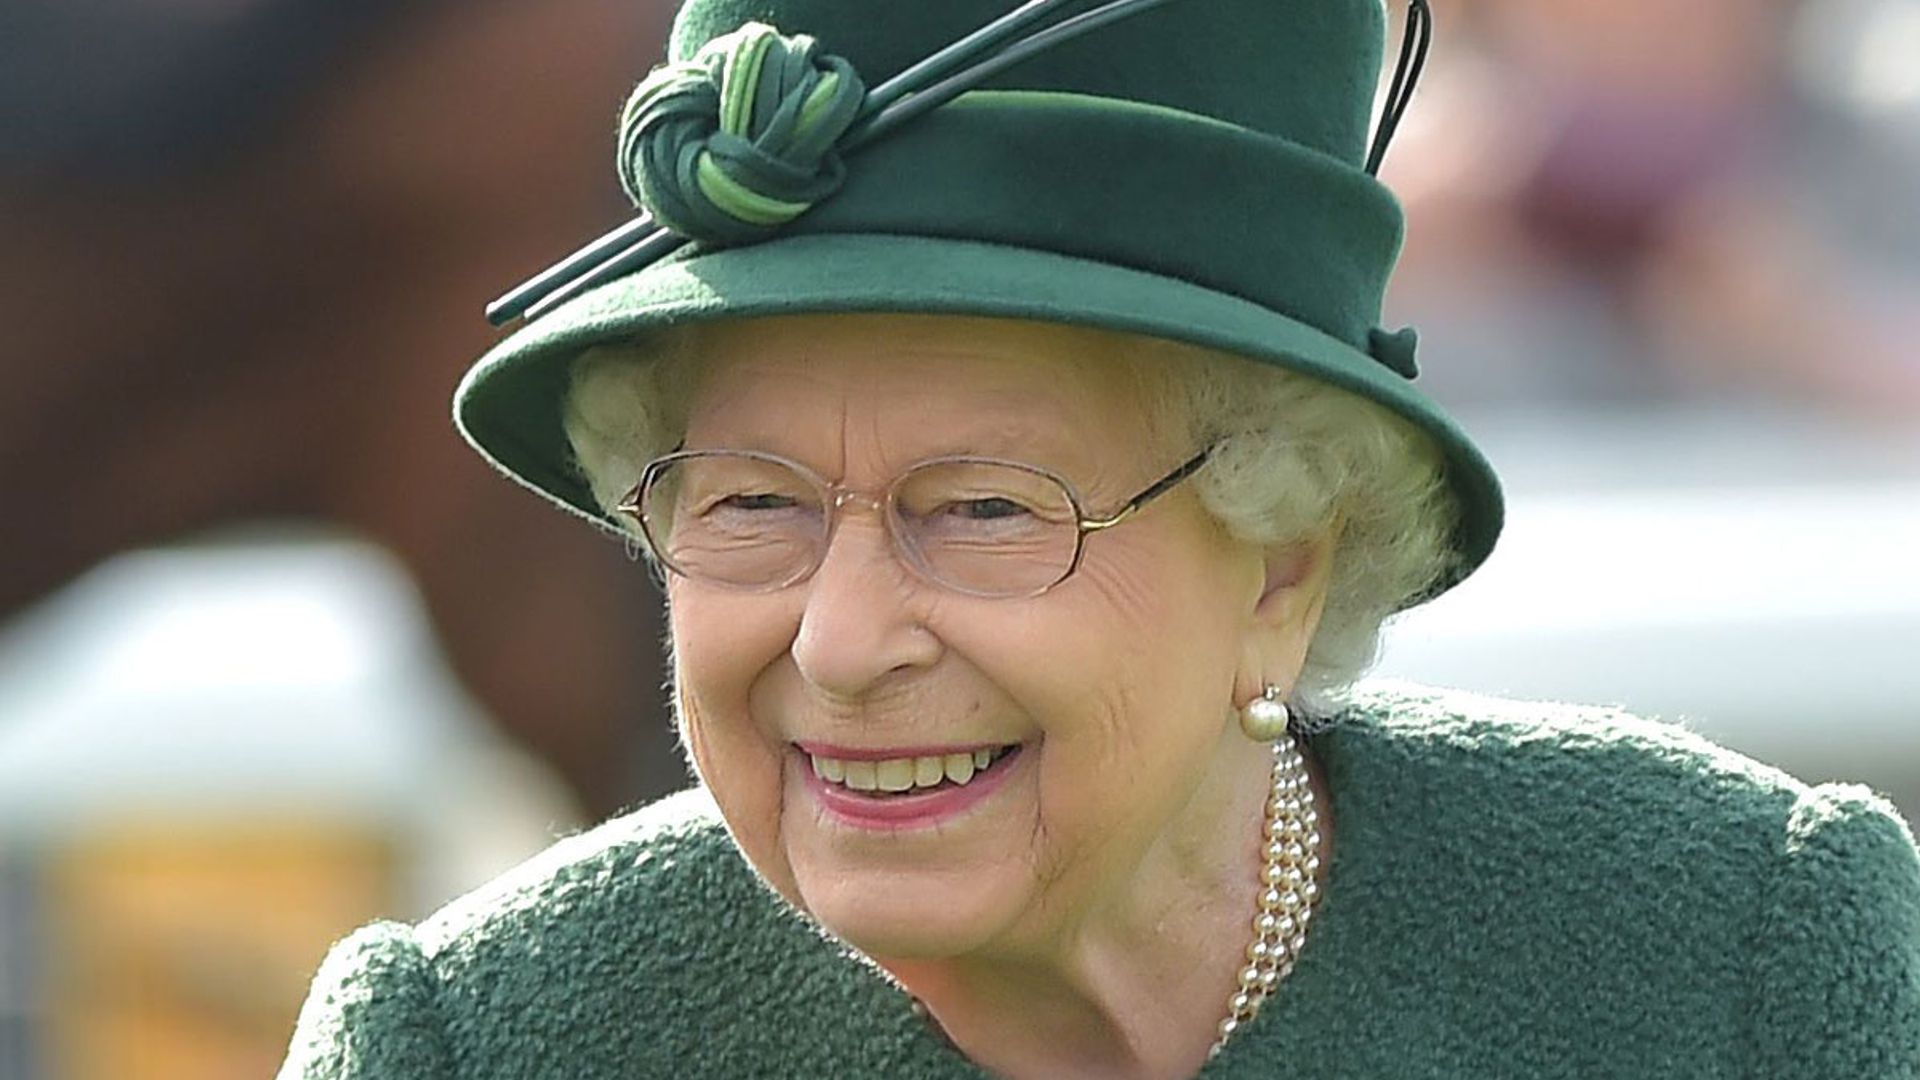 The Queen without a brooch